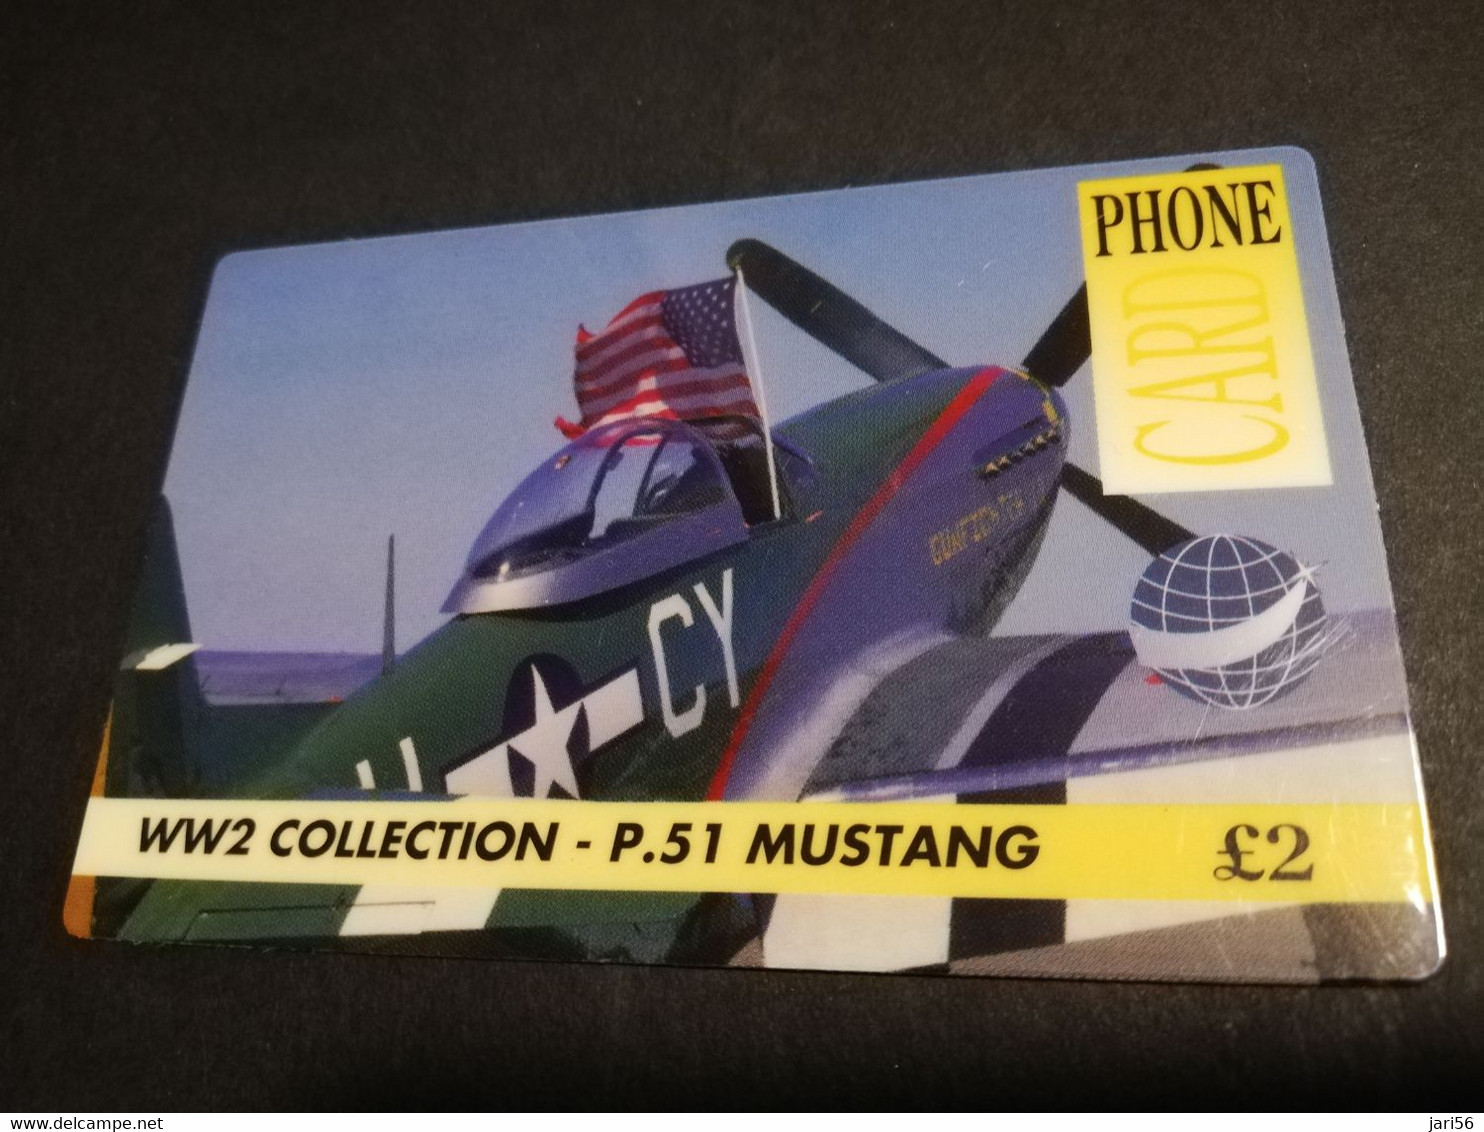 GREAT BRITAIN   3 POUND  AIR PLANES  P-51 MUSTANG   DIT PHONECARD    PREPAID CARD      **5918** - Collezioni